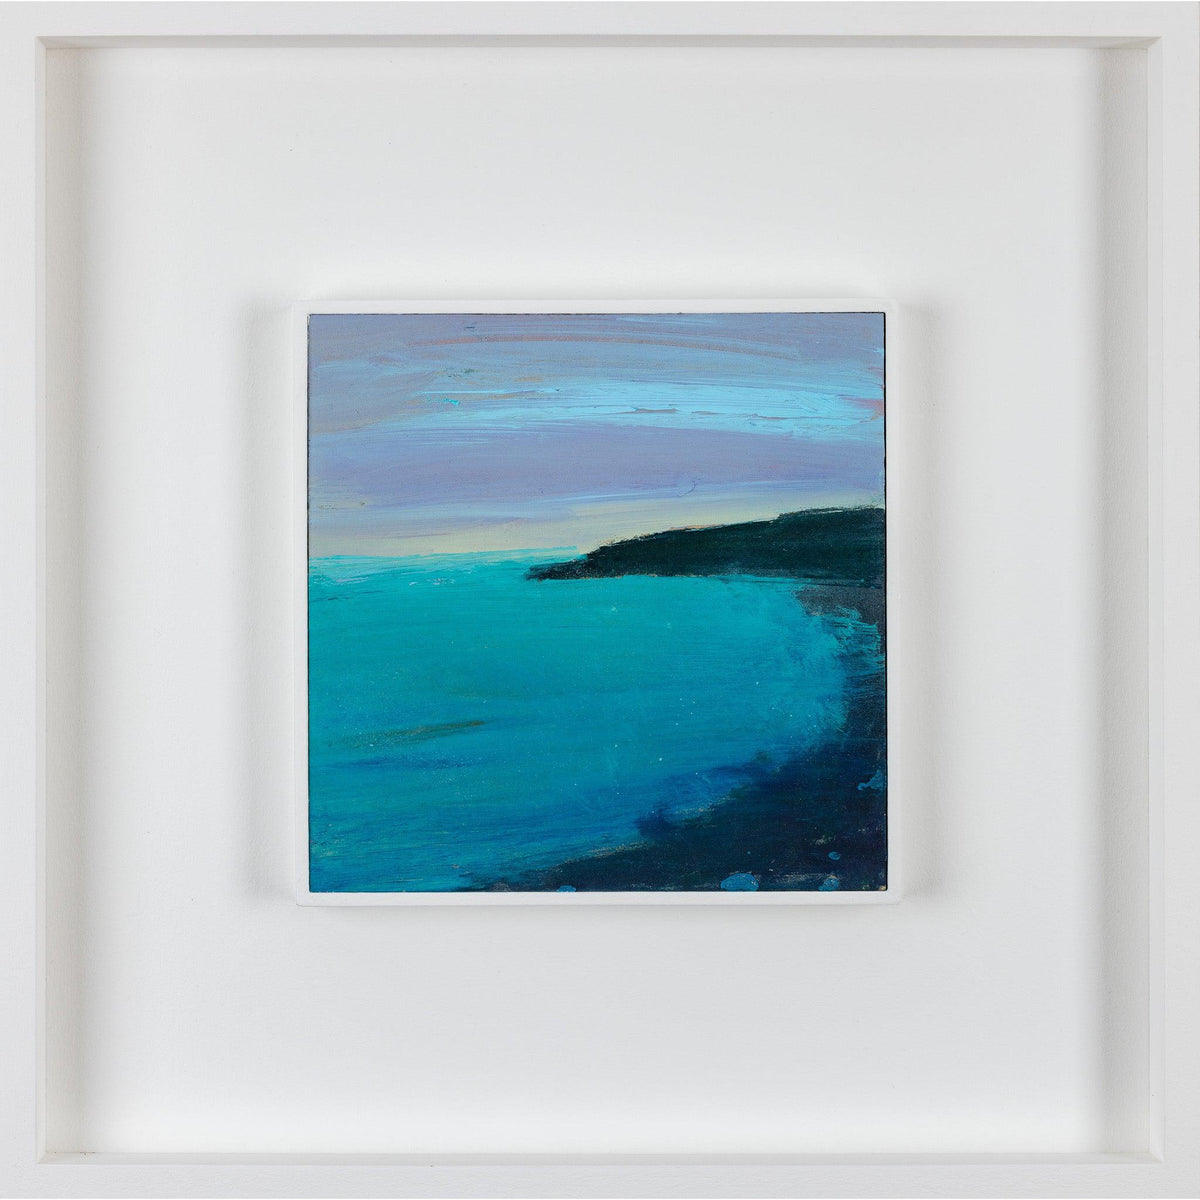 &#39;Sea Breeze&#39; mixed media framed original by Alex Yarlett, available at Padstow Gallery, Cornwall